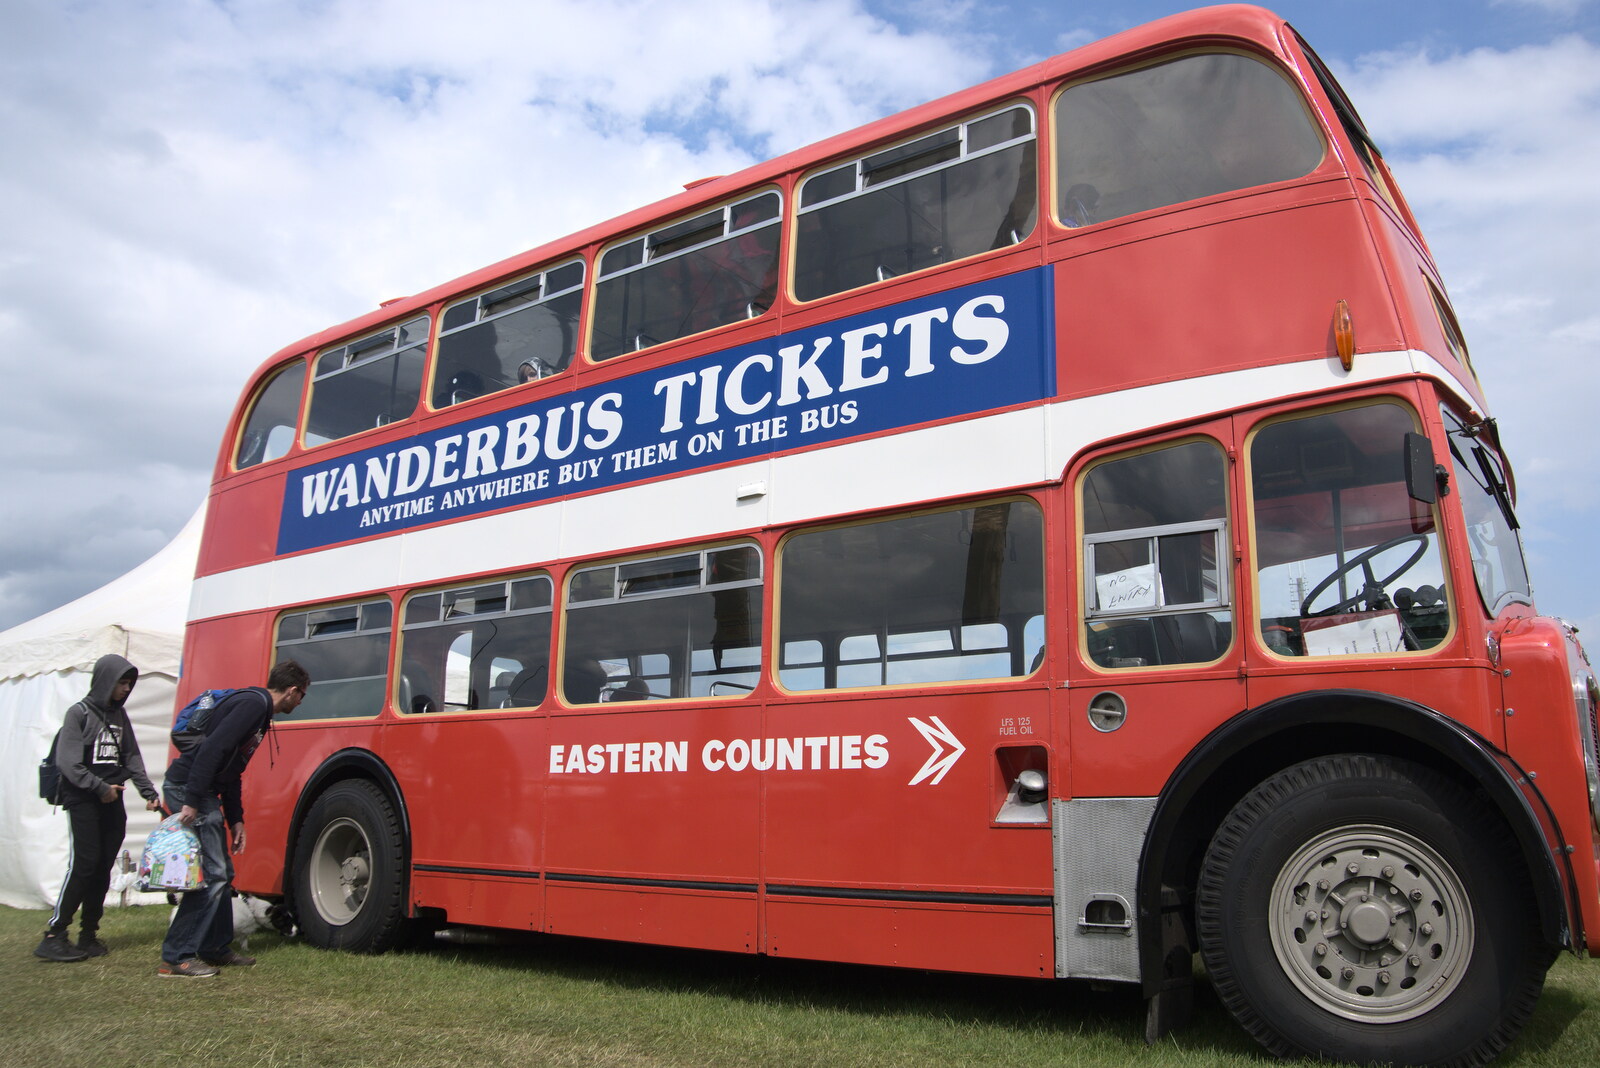 The Suffolk Show, Trinity Park, Ipswich - 1st June 2022: The old Eastern Counties bus